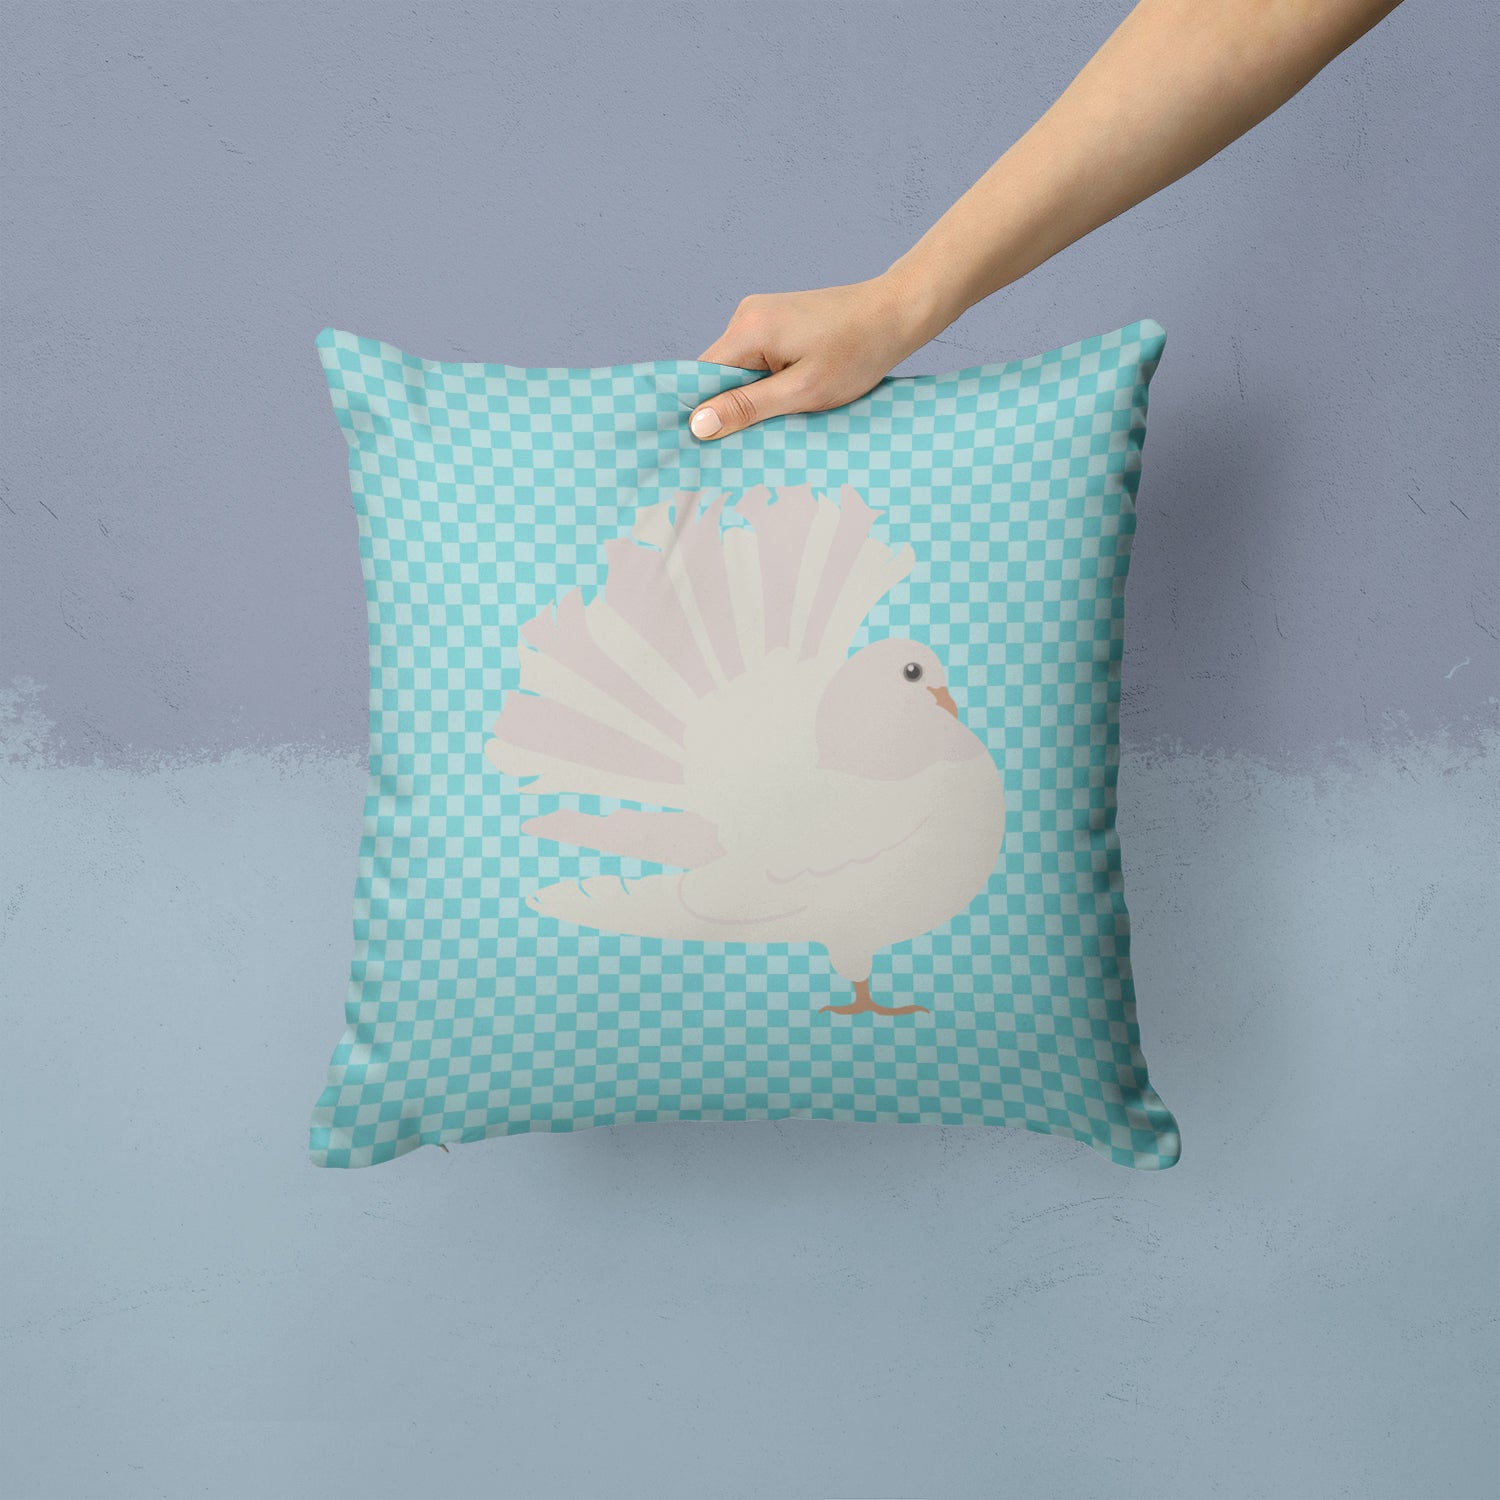 Silver Fantail Pigeon Blue Check Fabric Decorative Pillow BB8124PW1414 - the-store.com